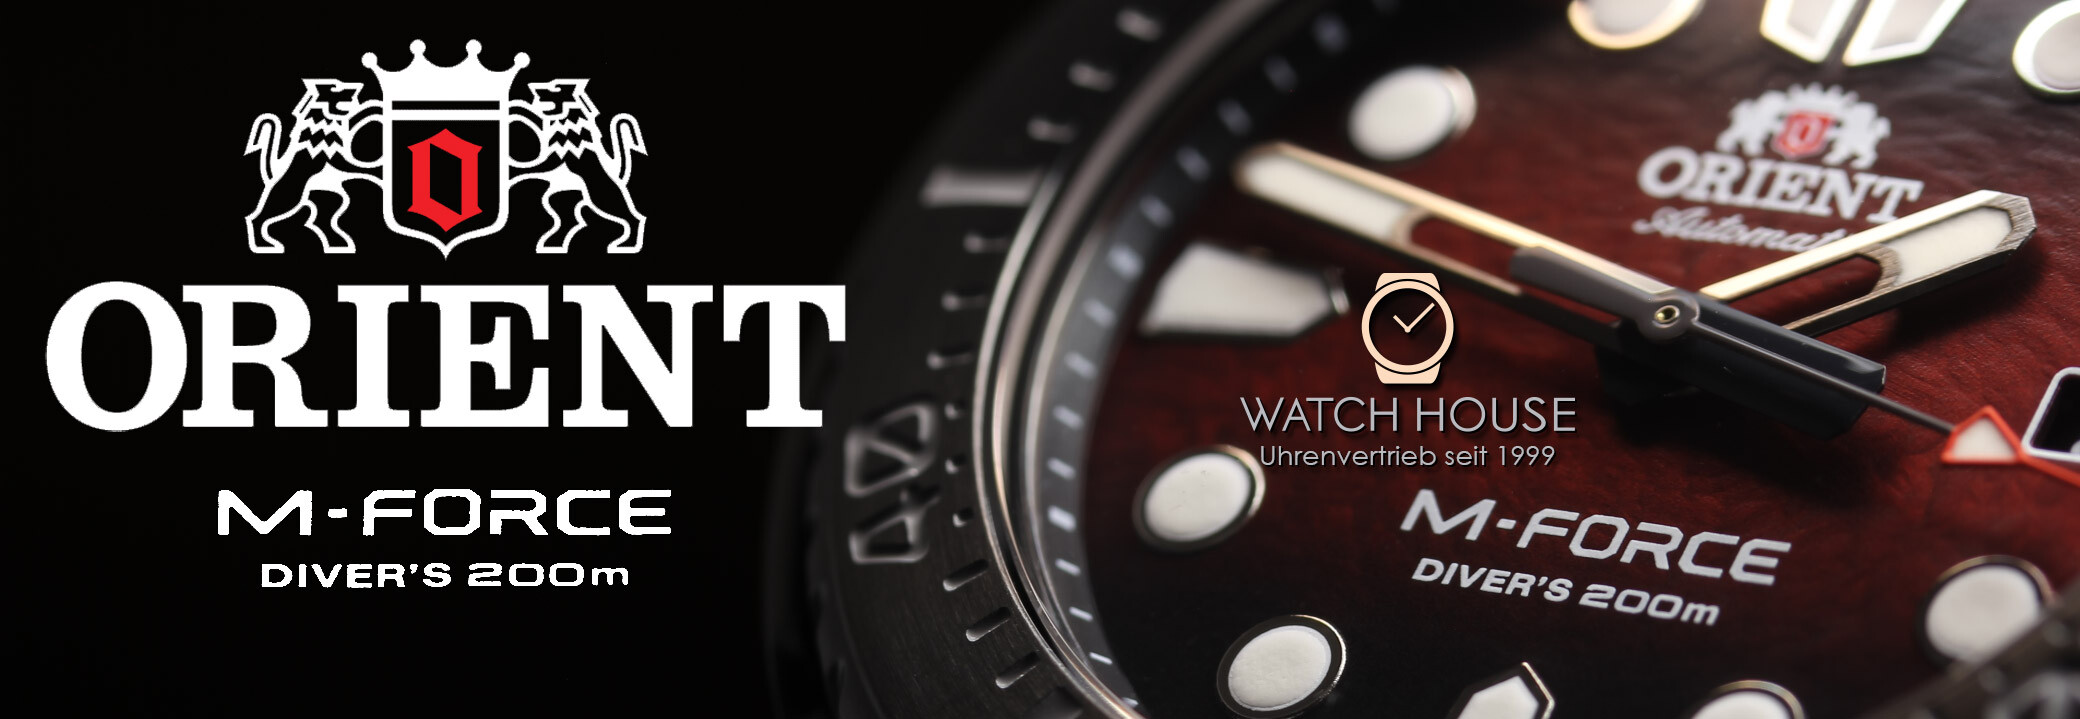 Enhance Your Style with Watches: Shop at Watch House Now